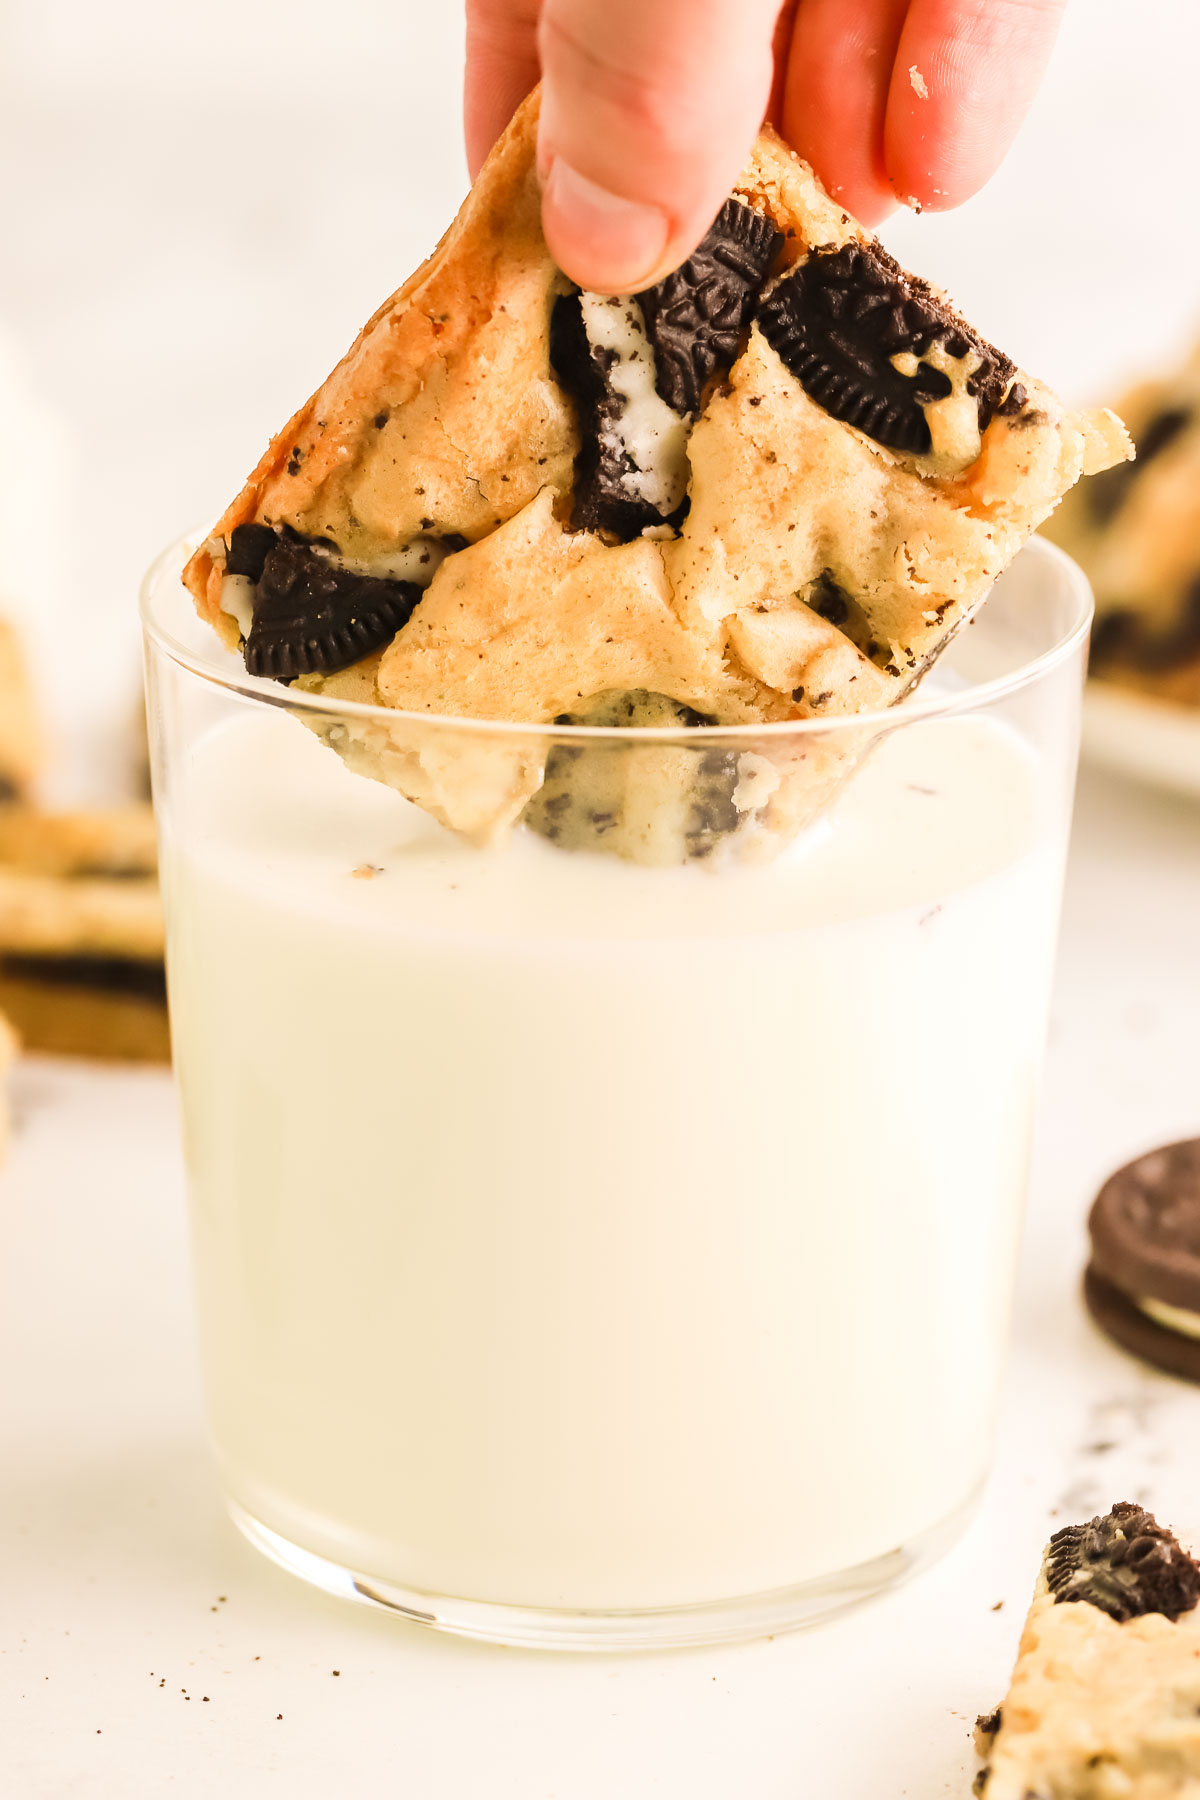 Oreo blondie being dunked into a glass of milk